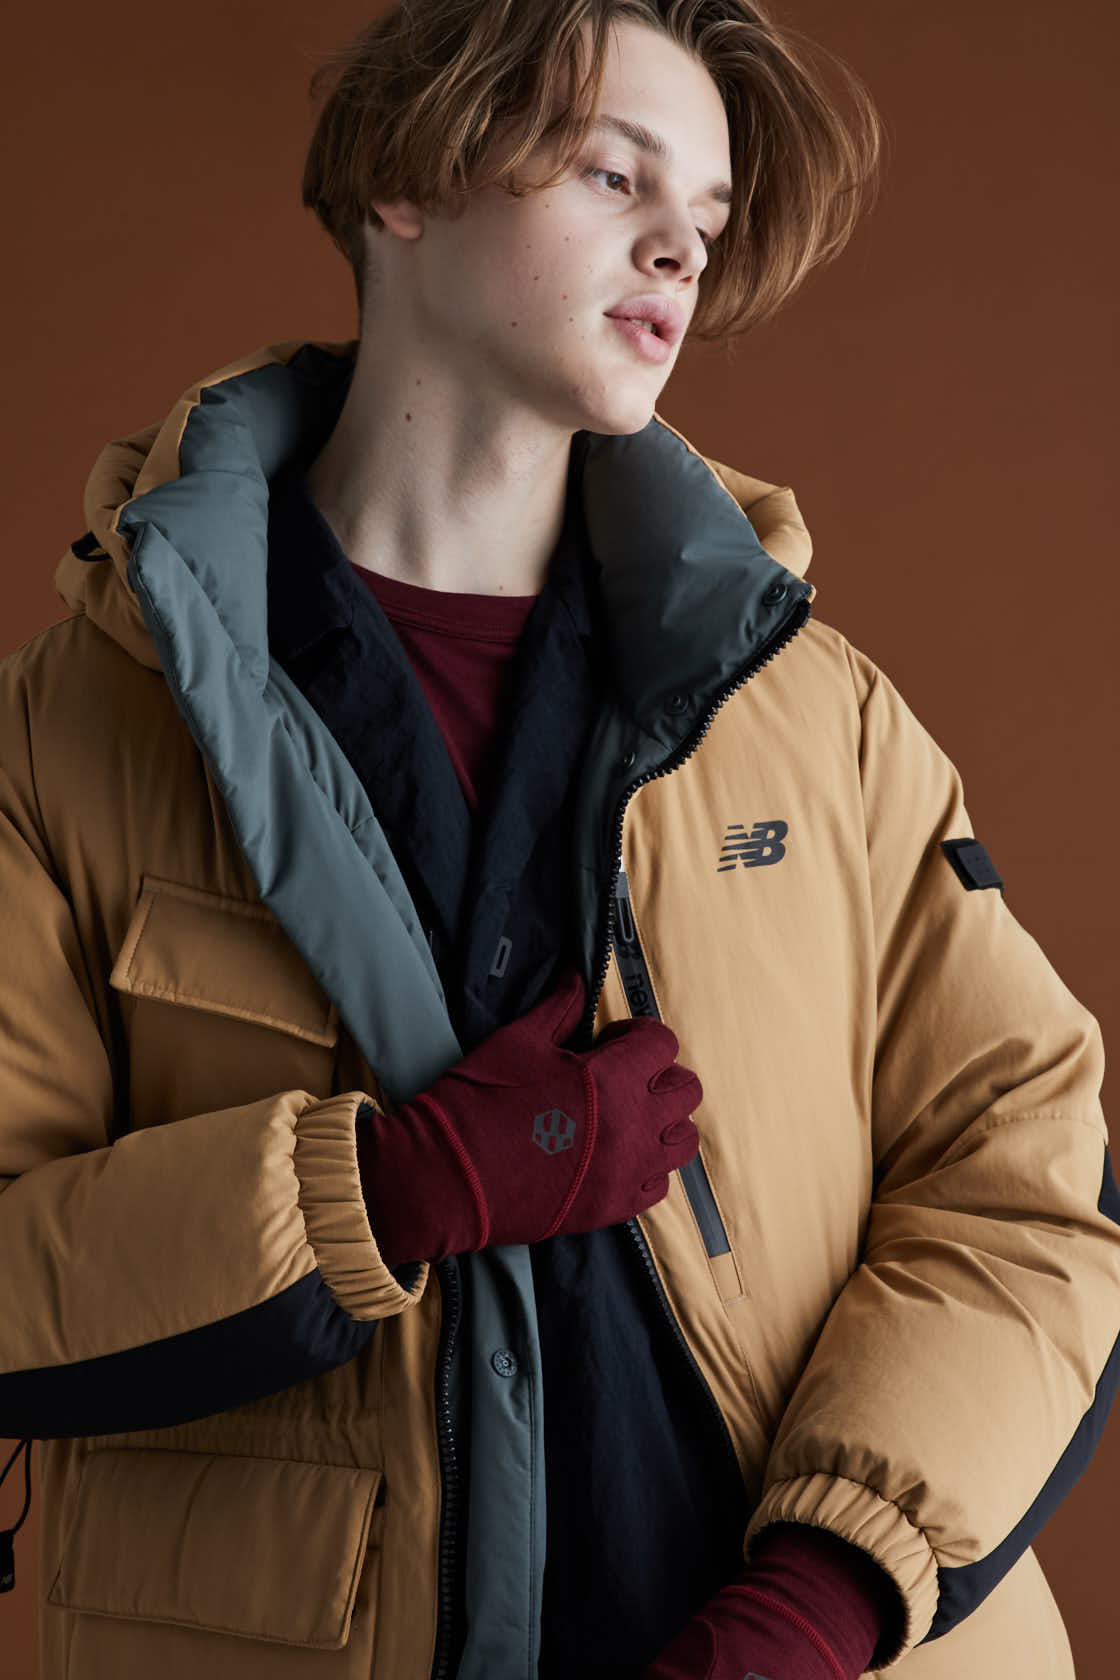 NB公式 - ニュースリリース - New Balance DOWN JACKET COLLECTION